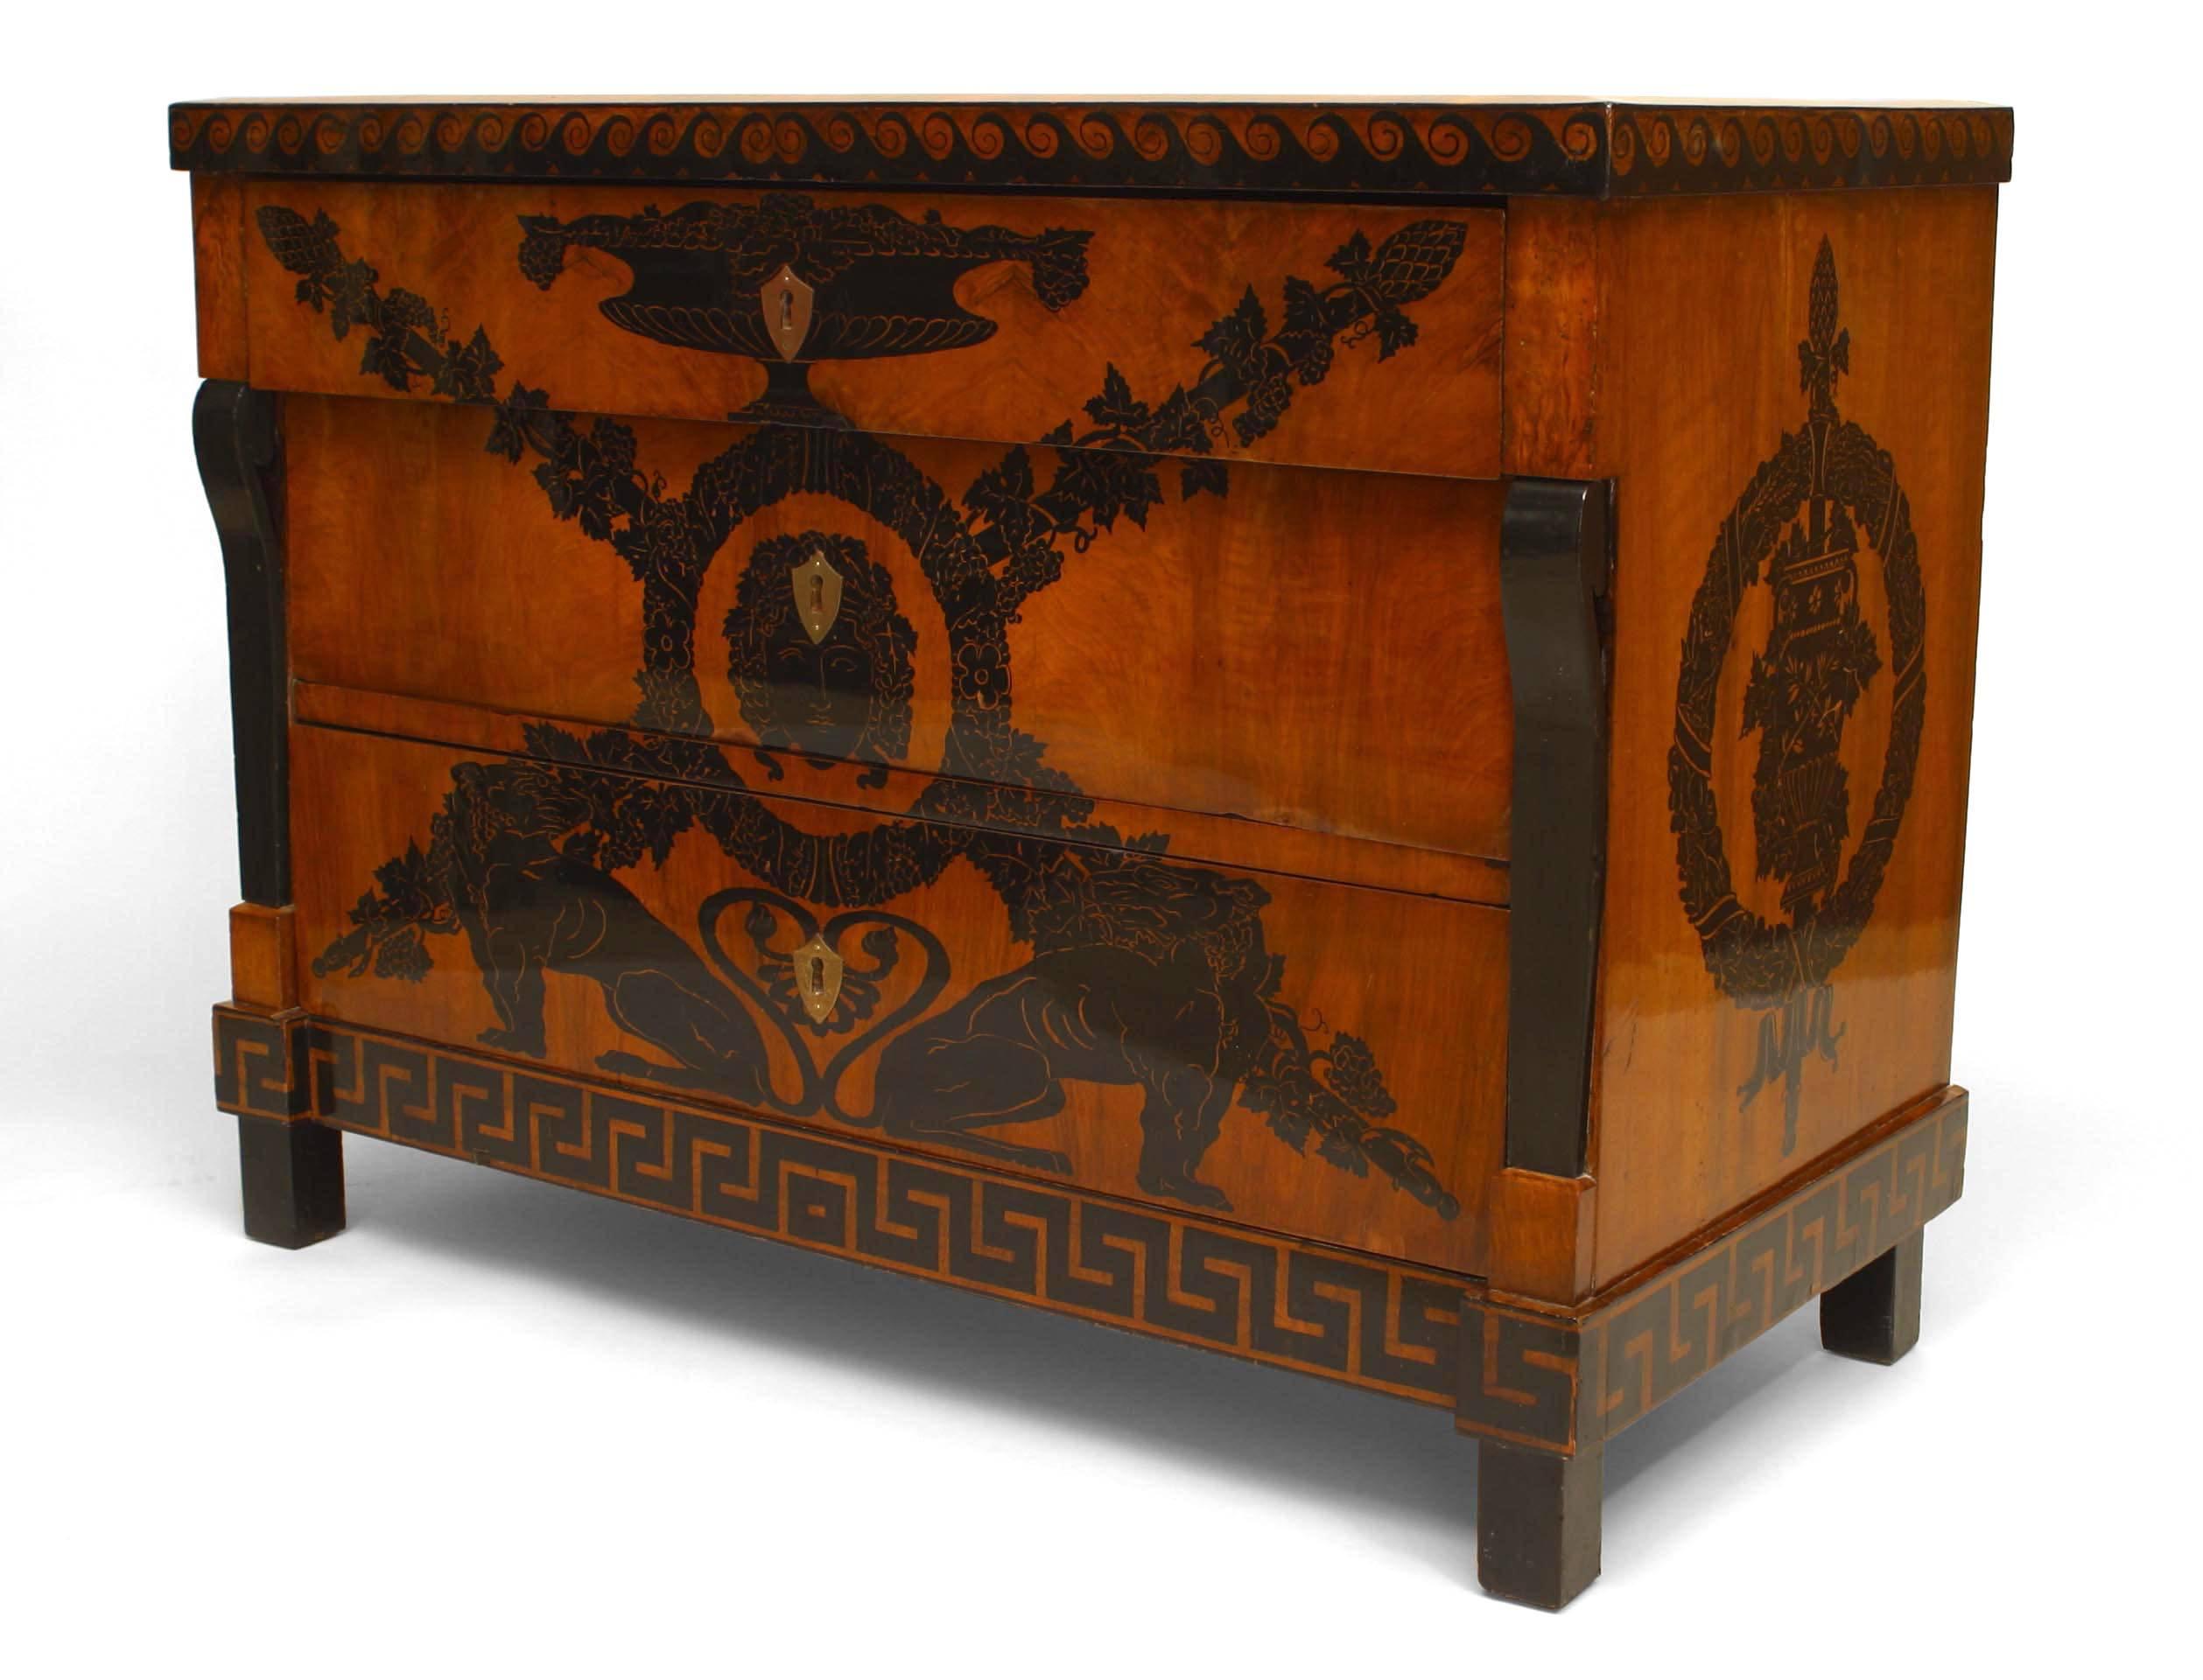 Italian Neo-classic (Early 19th Century) walnut chest with 3 drawers and decorated with ebonized penwork of wreaths, heads and other various motifs.
